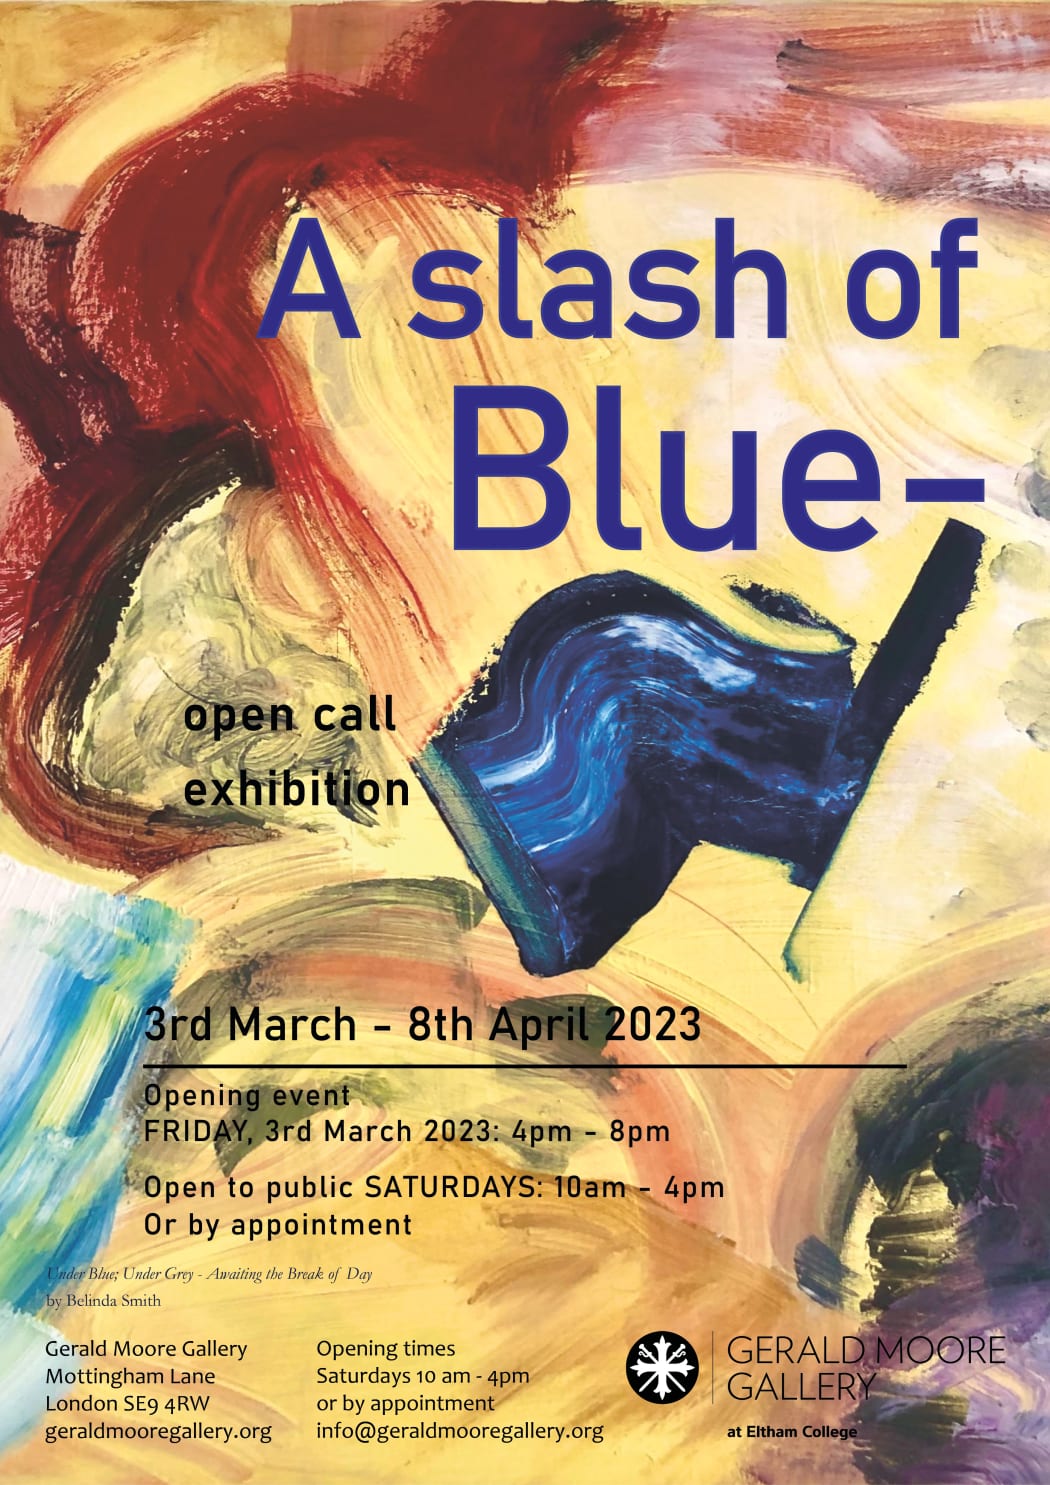 'A slash of Blue-' Open Call Painting Exhibition